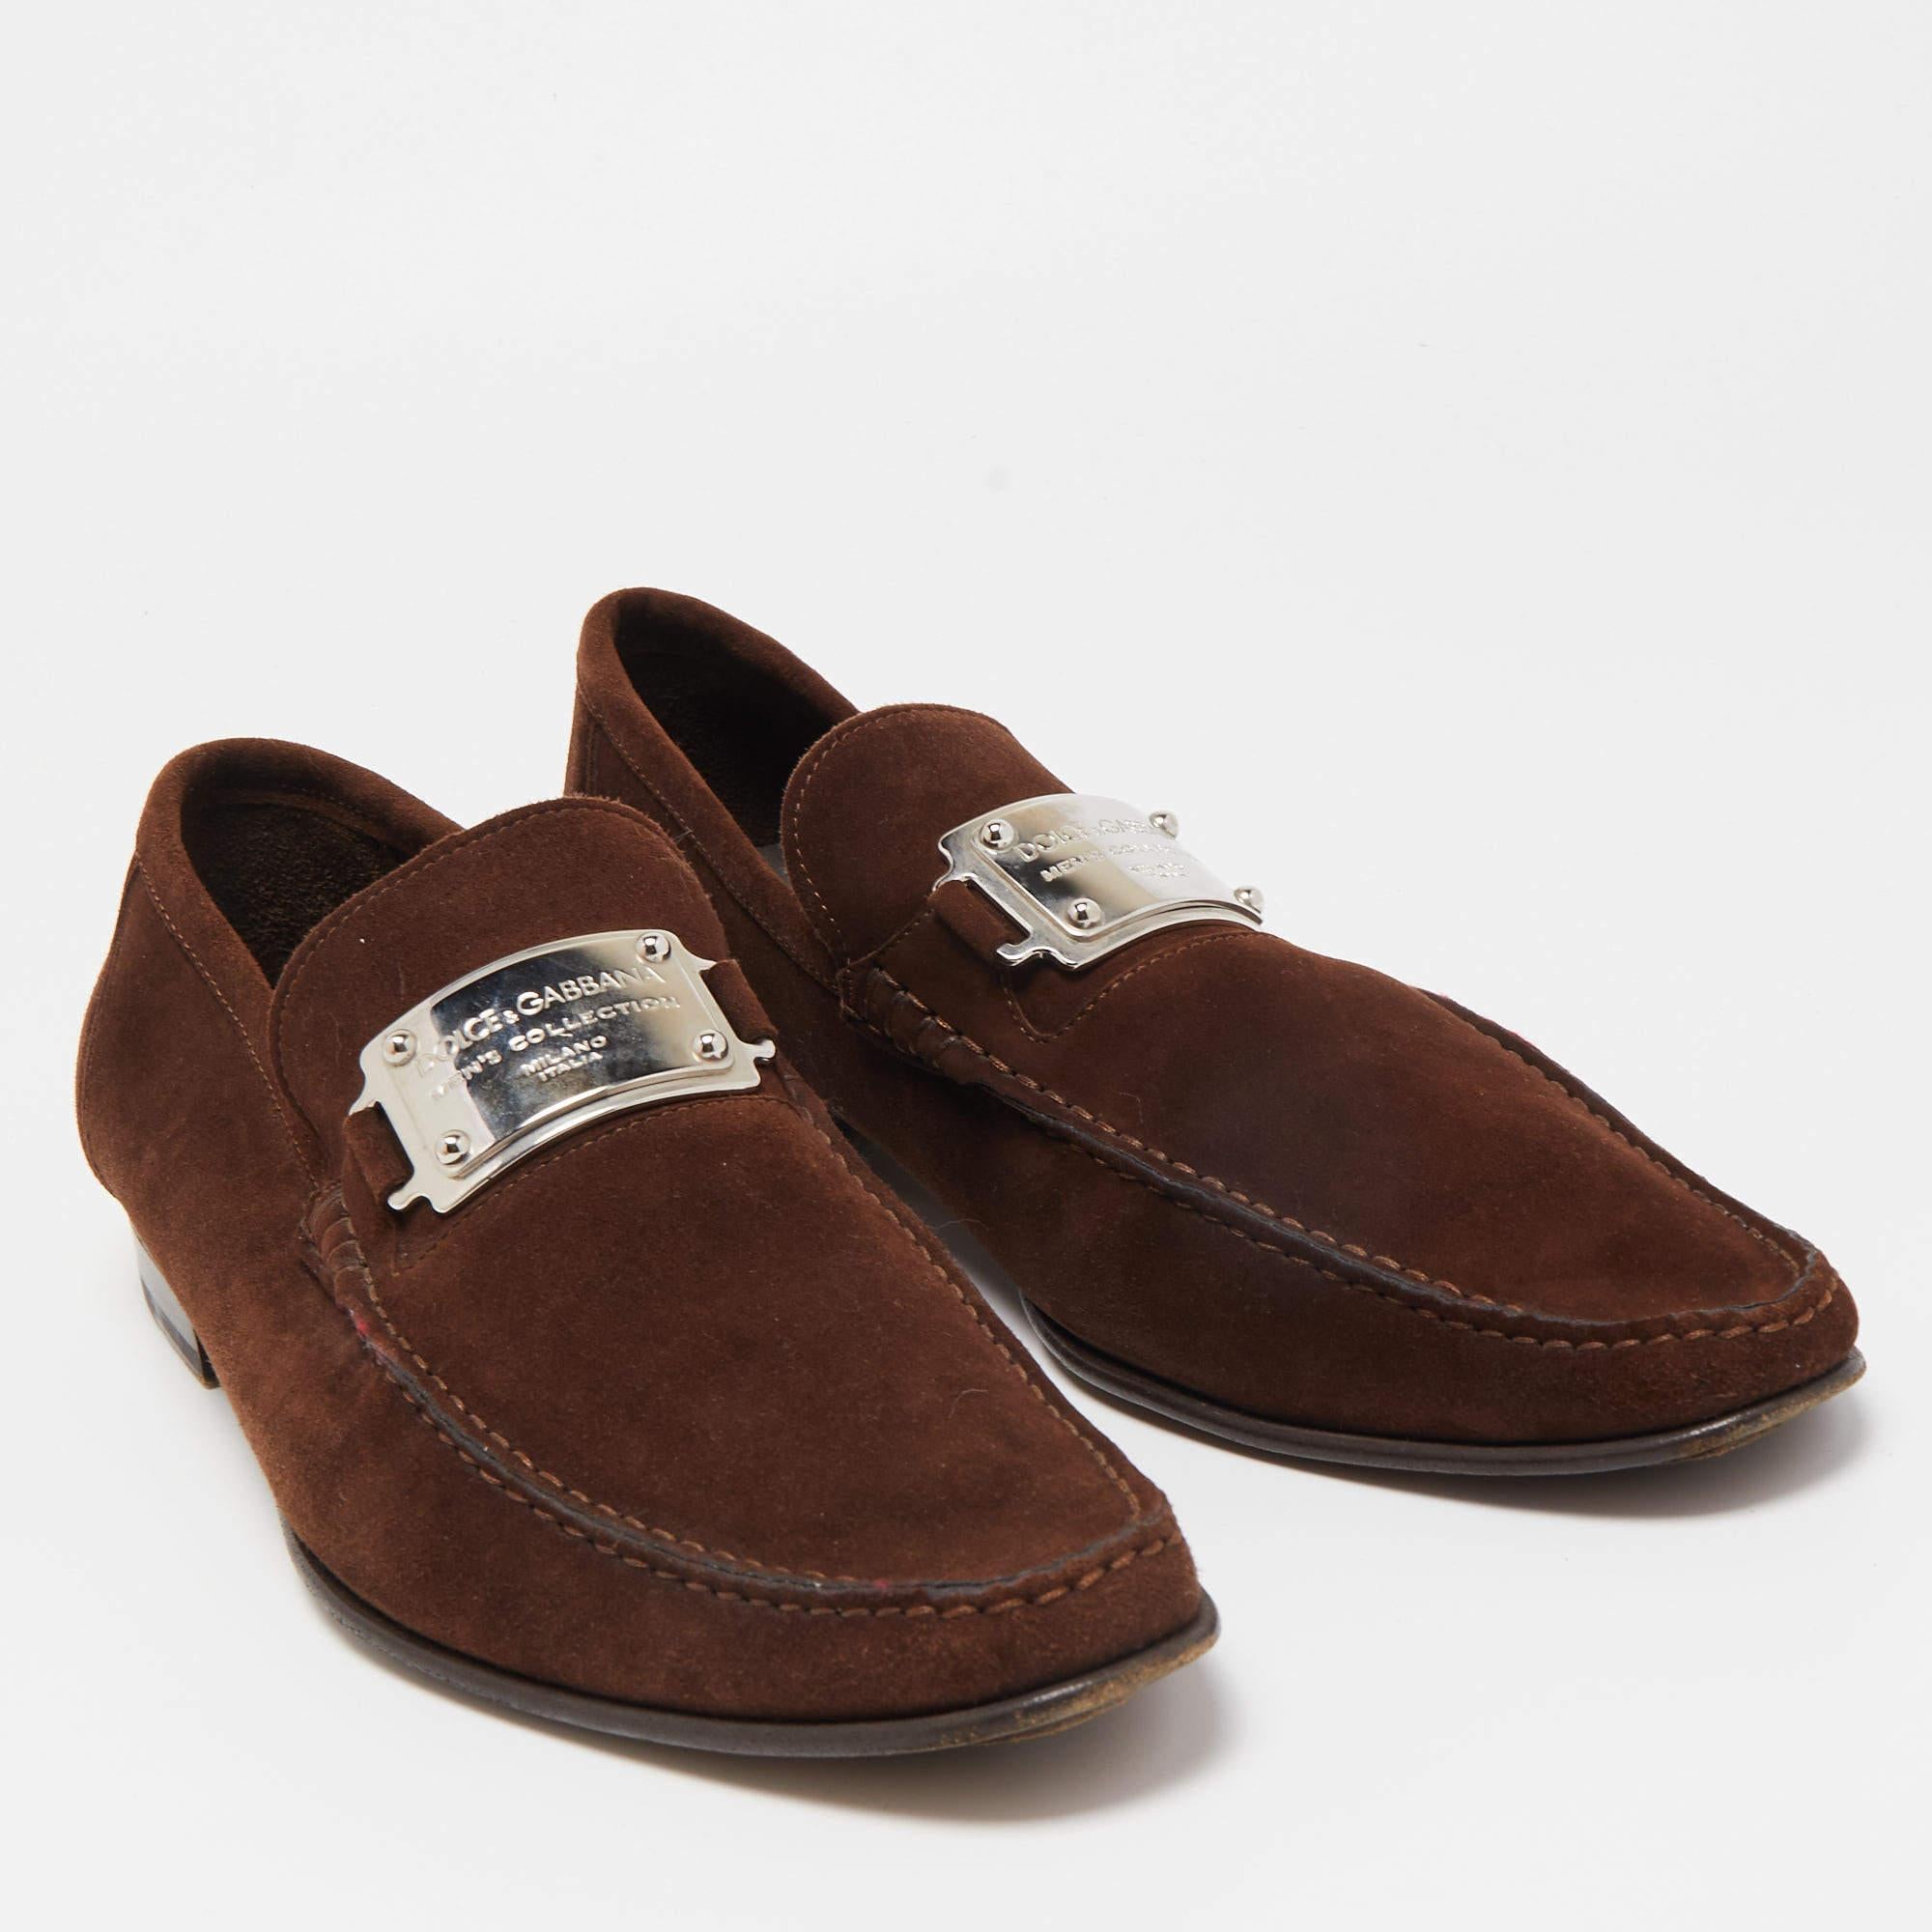 If you are on the lookout for smart and sleek loafers, this Dolce & Gabbana creation is the answer. Crafted from suede and leather into a lovely shape, these loafers bring a blend of luxury and comfort. They feature logo plates on the uppers,